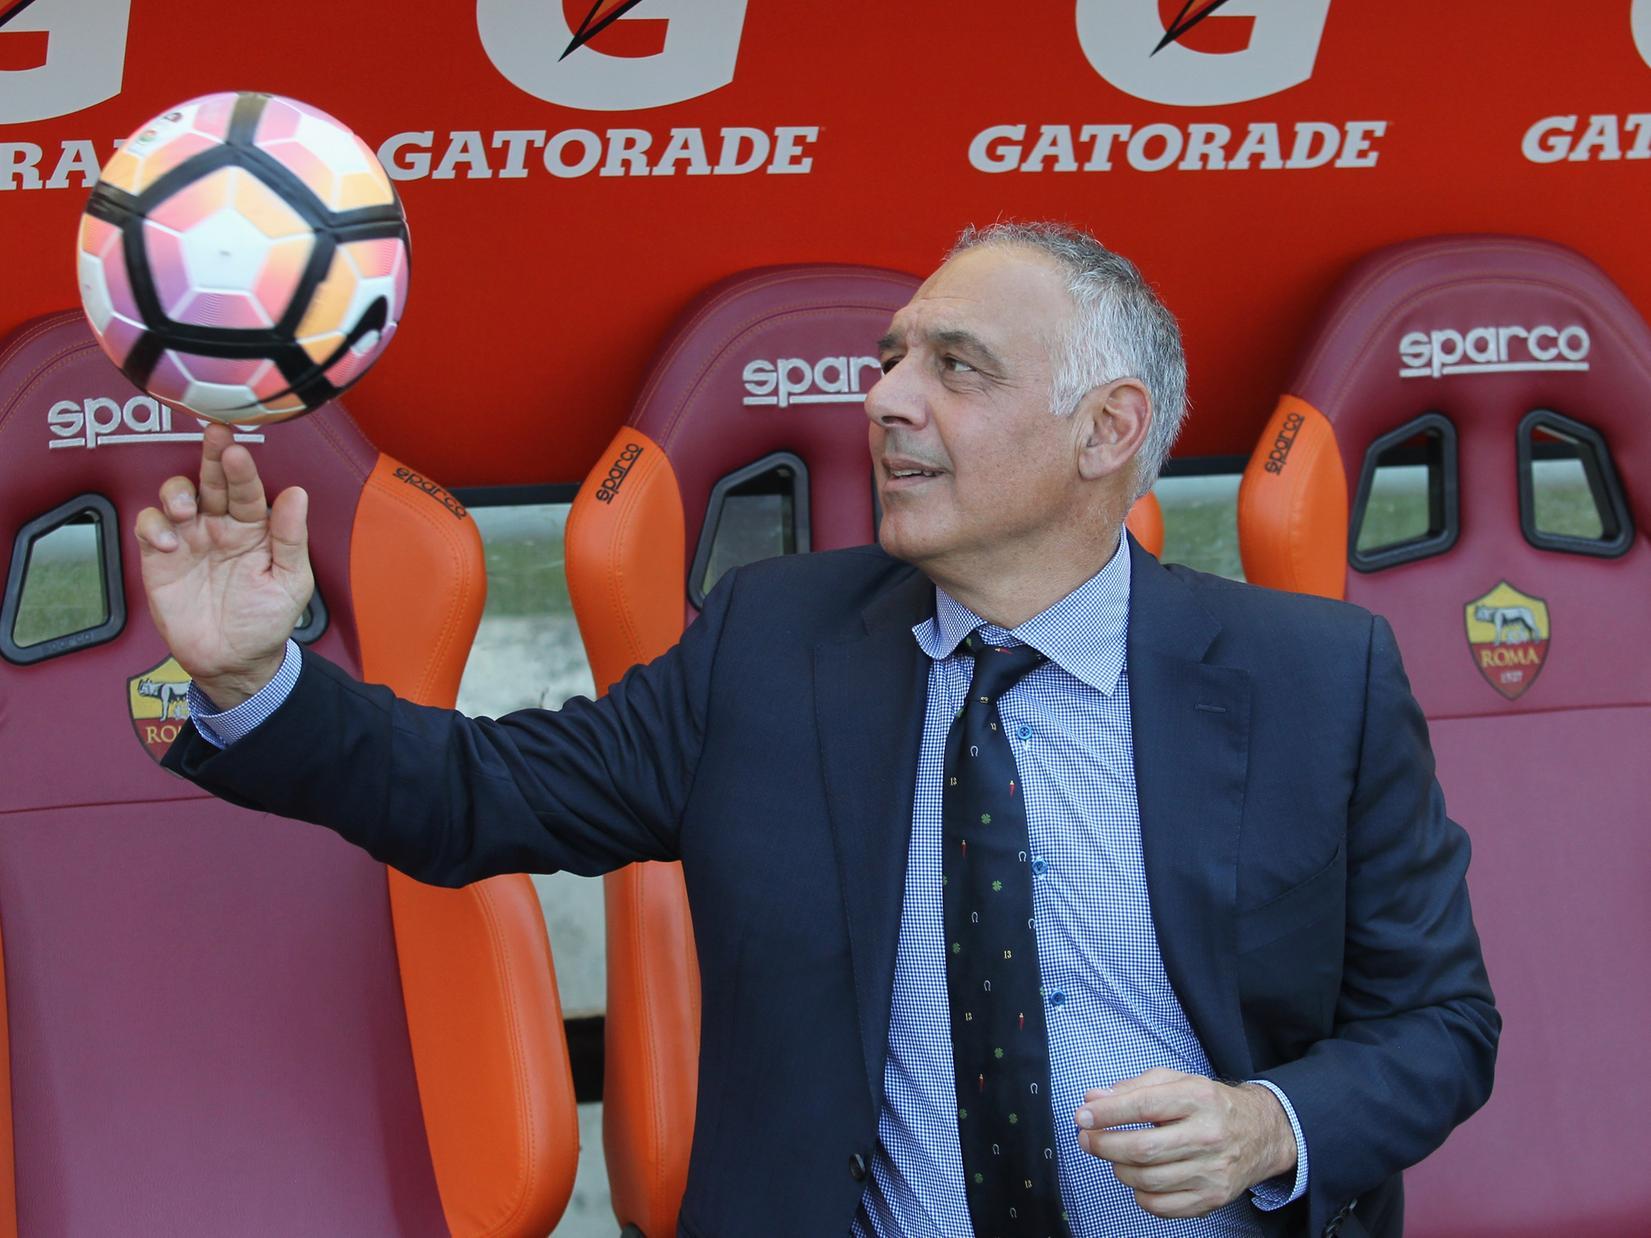 US billionaire James Pallotta, current owner of Roma, is said to be weighing up a major investment in either Leeds United and Newcastle, should he successfully move the Serie A club on to new membership (Sport Witness)